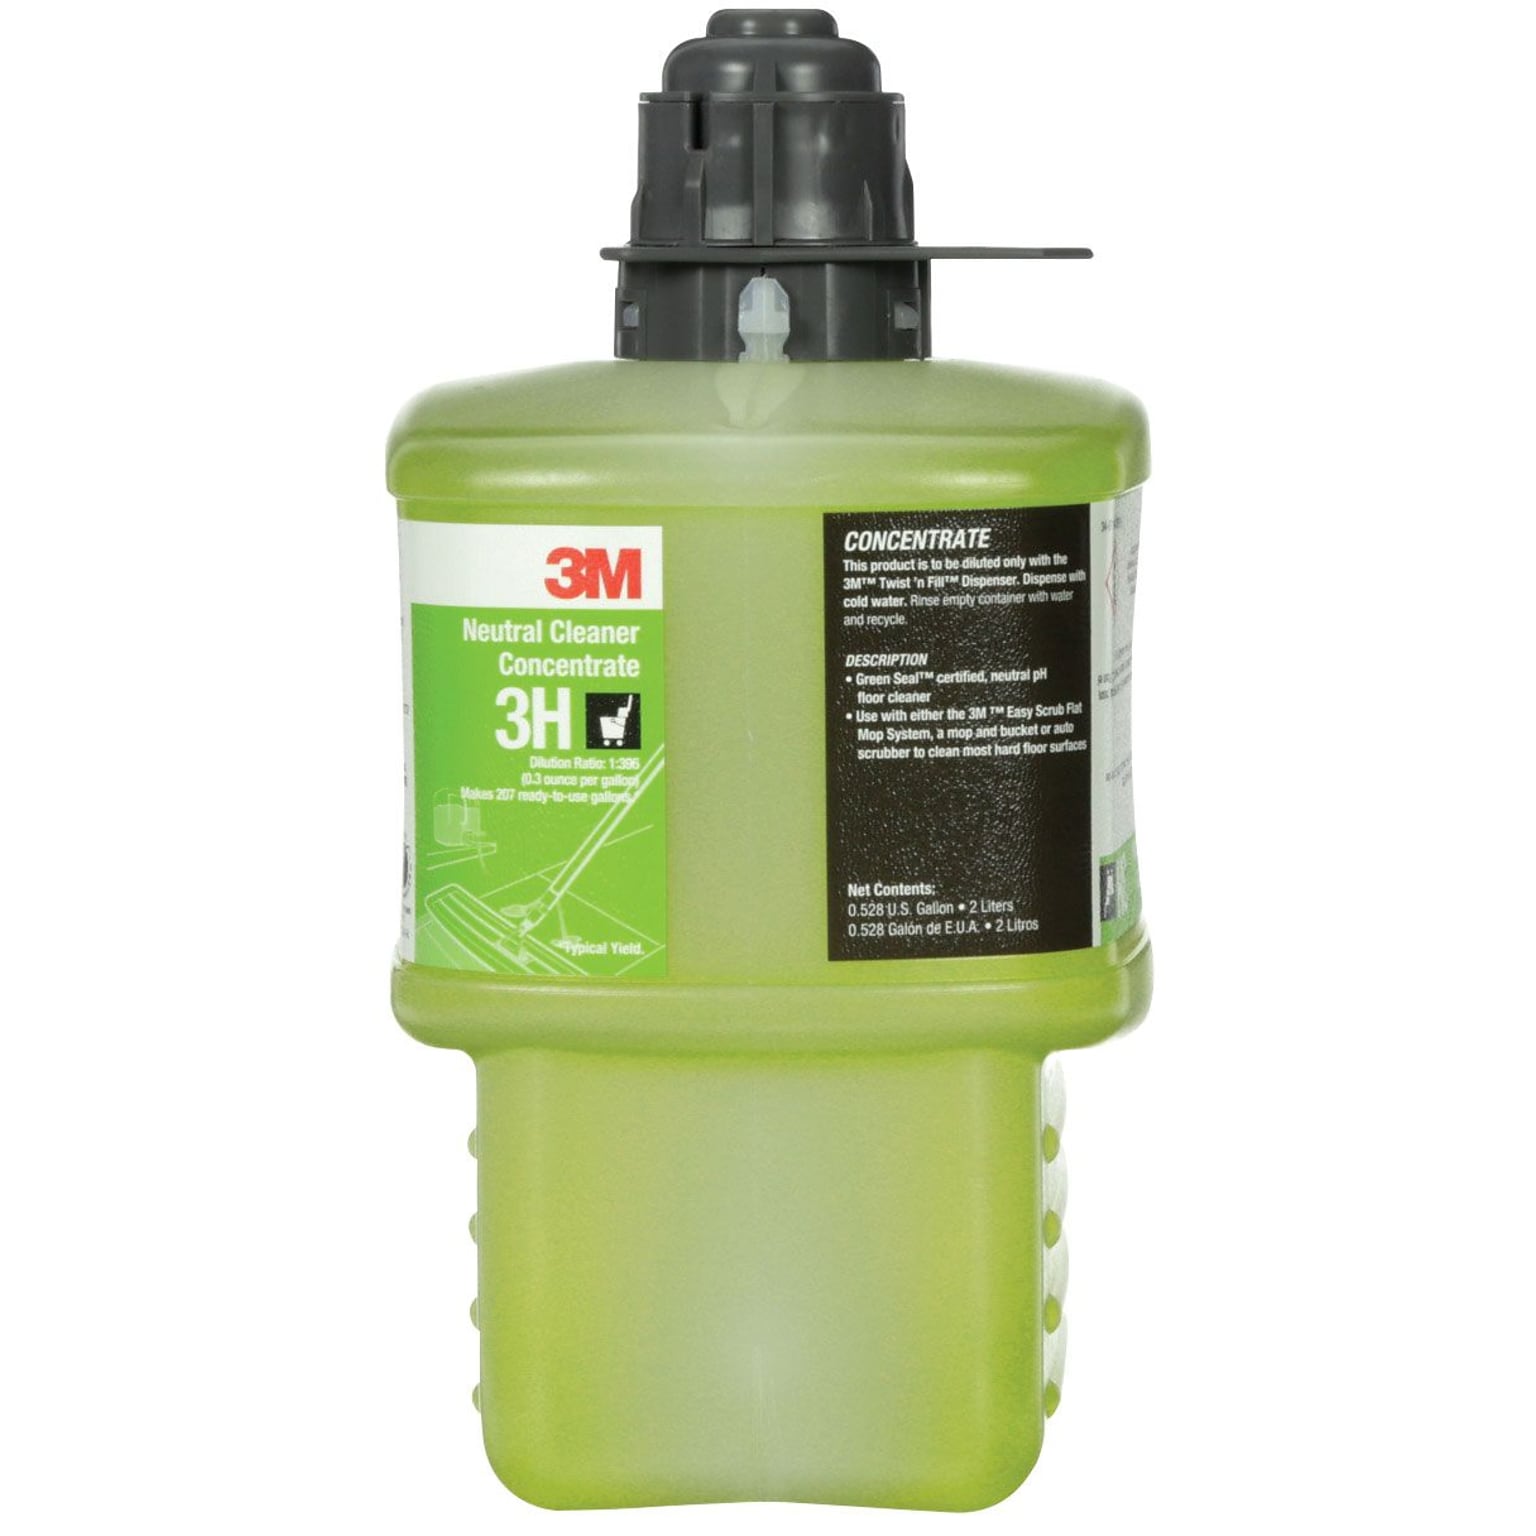 3M Twist N Fill Neutral Cleaner Concentrate, 2 Liter, 6/Case (3H)